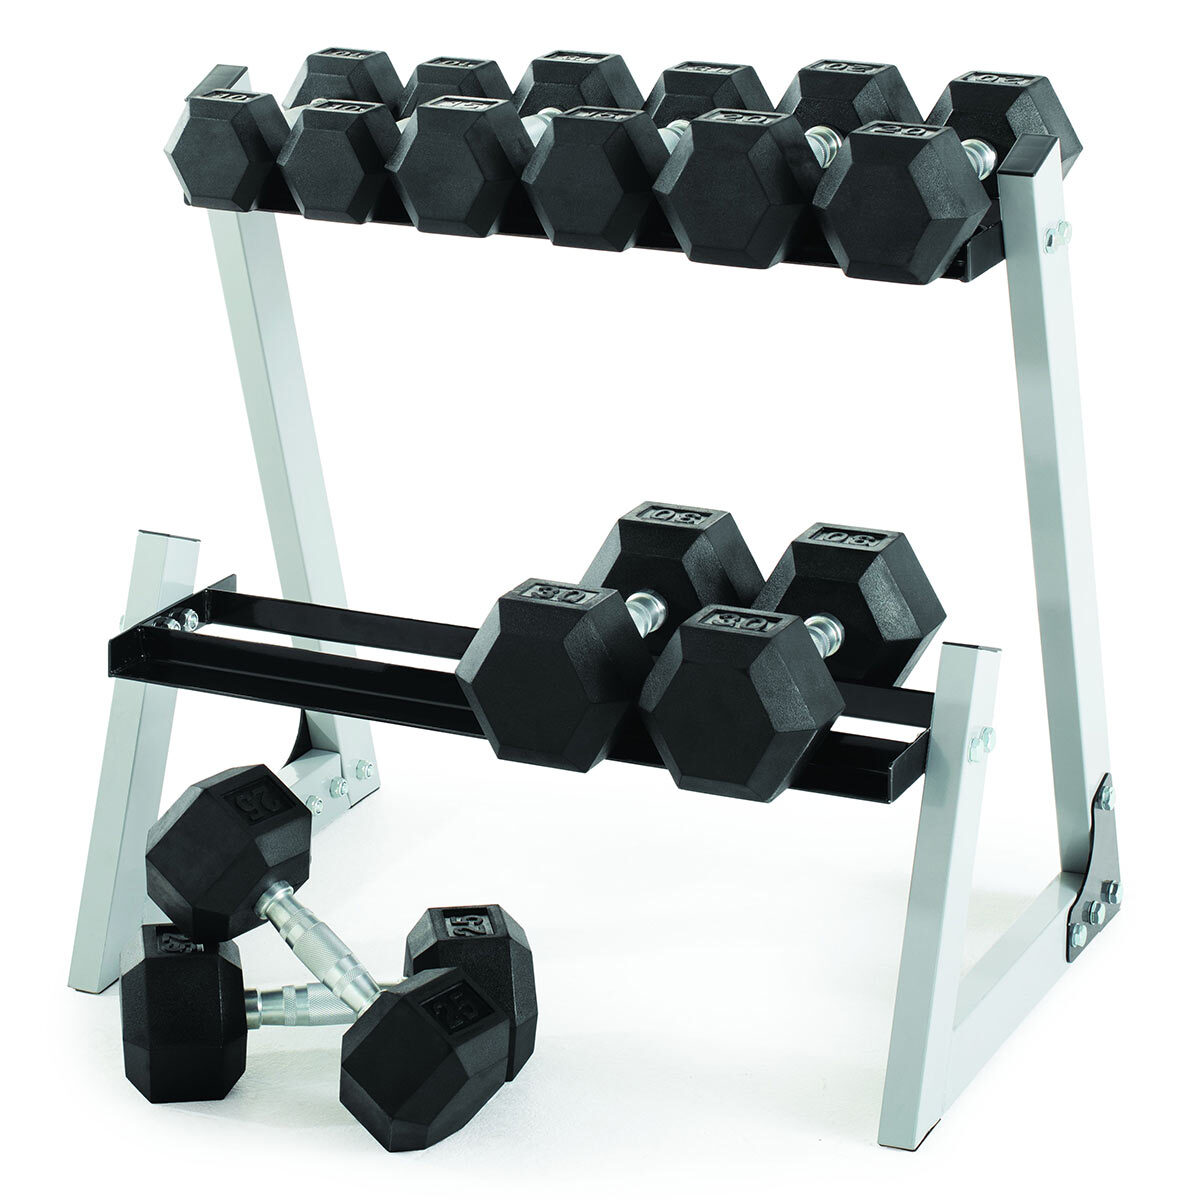 Lead image for Weider Dumbbell Kit and Rack